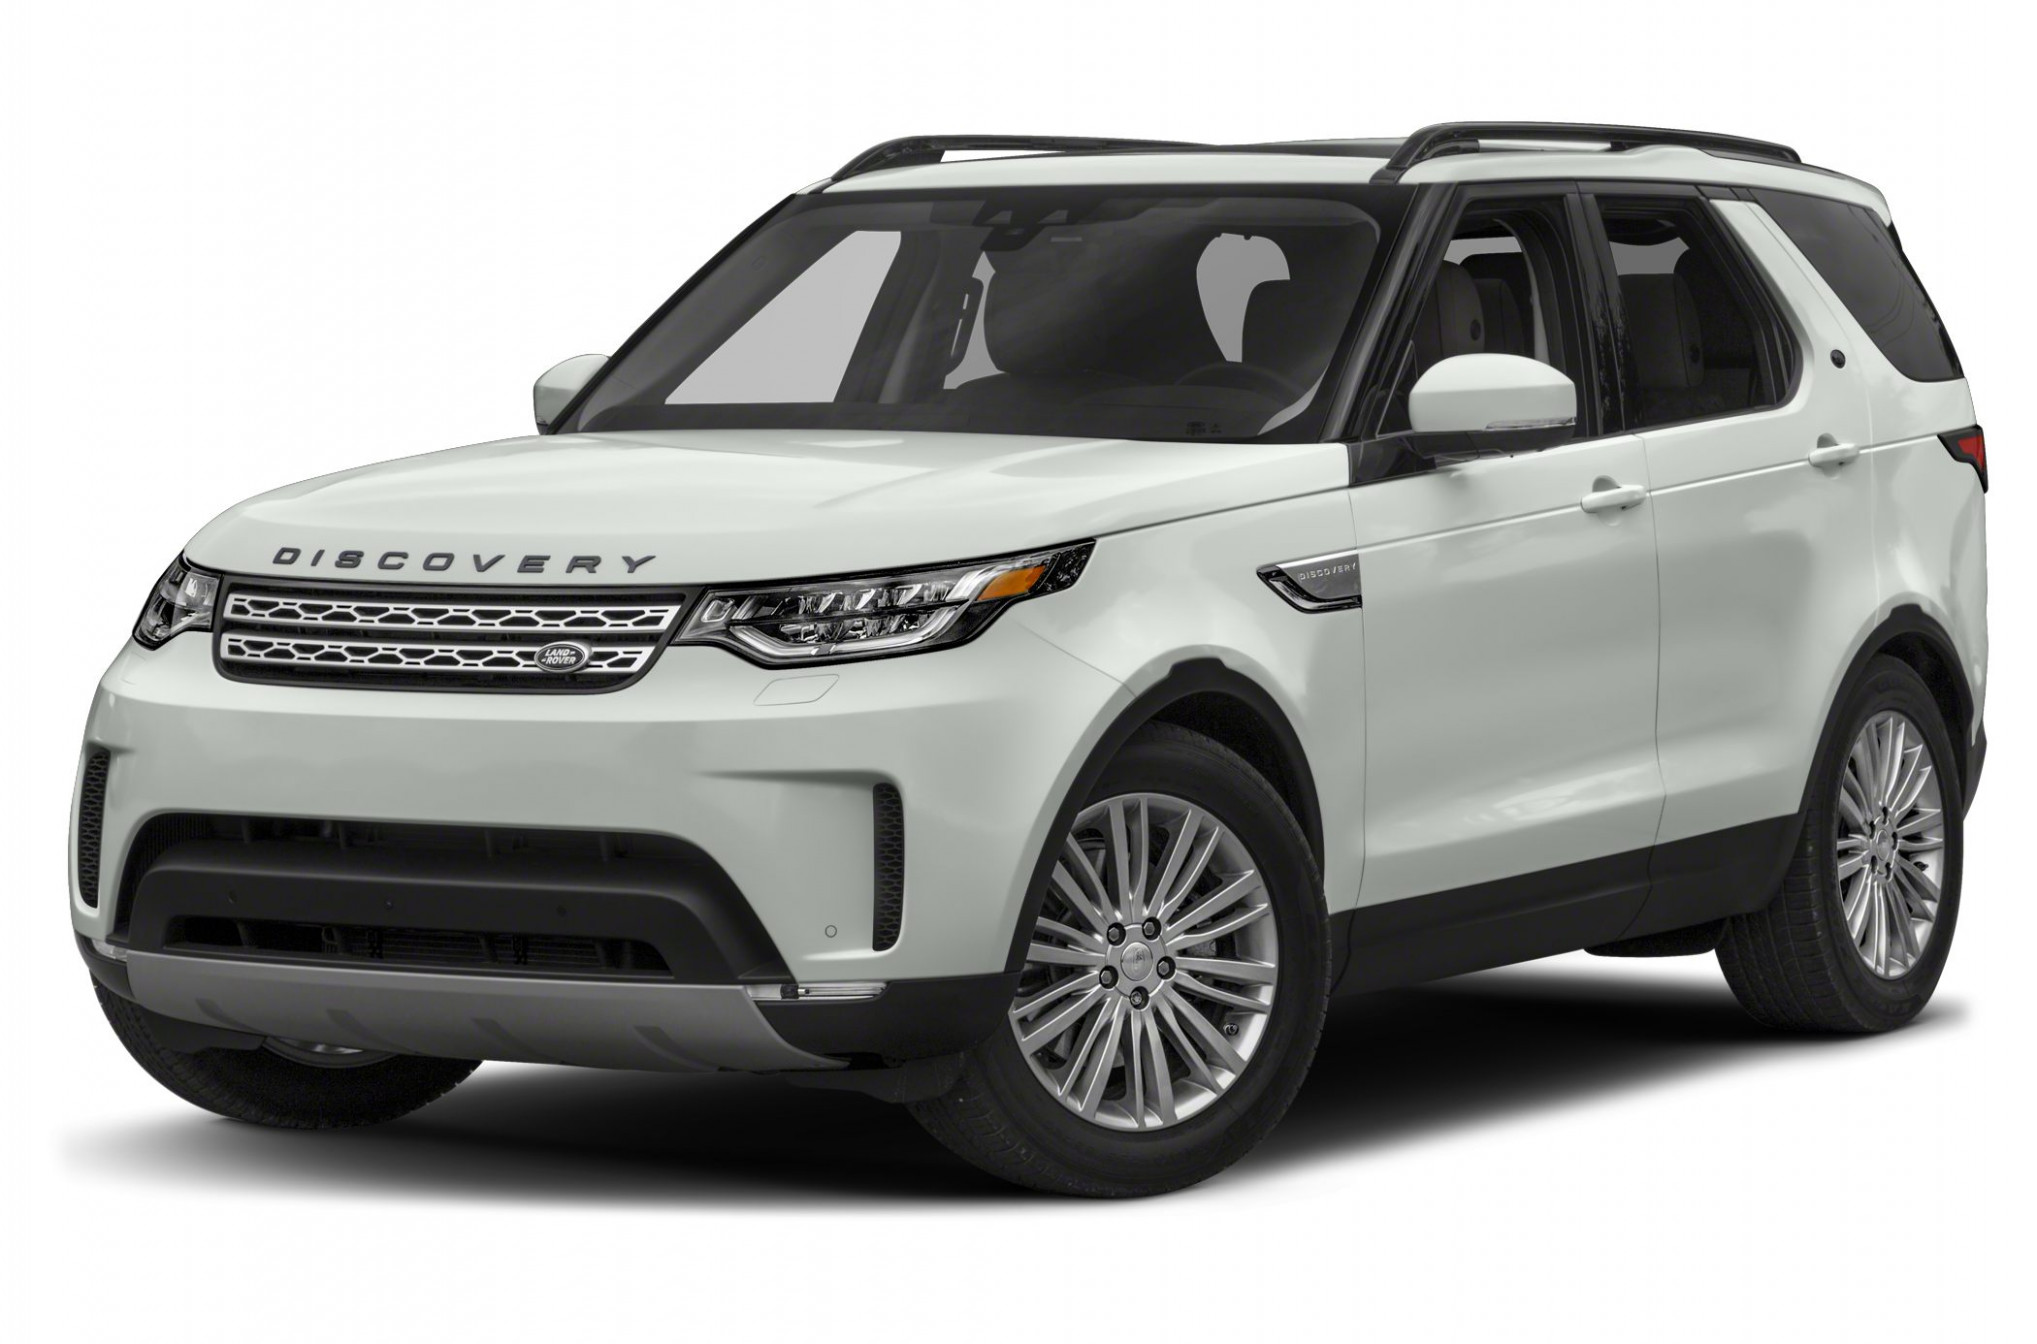 Performance land rover discovery specs